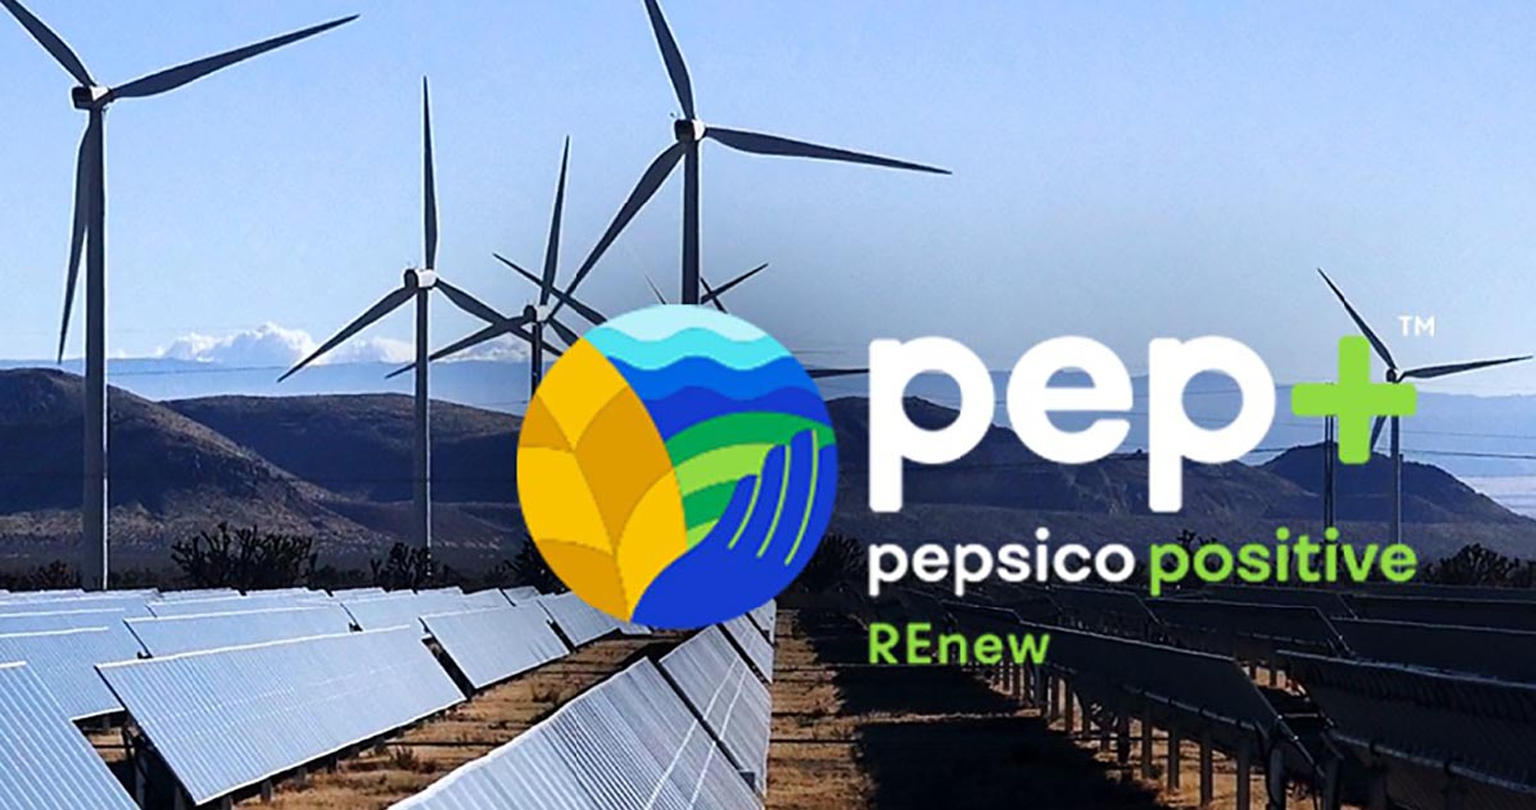 pep+ PepsiCo Positive REnew logo in front of solar panels and windmills